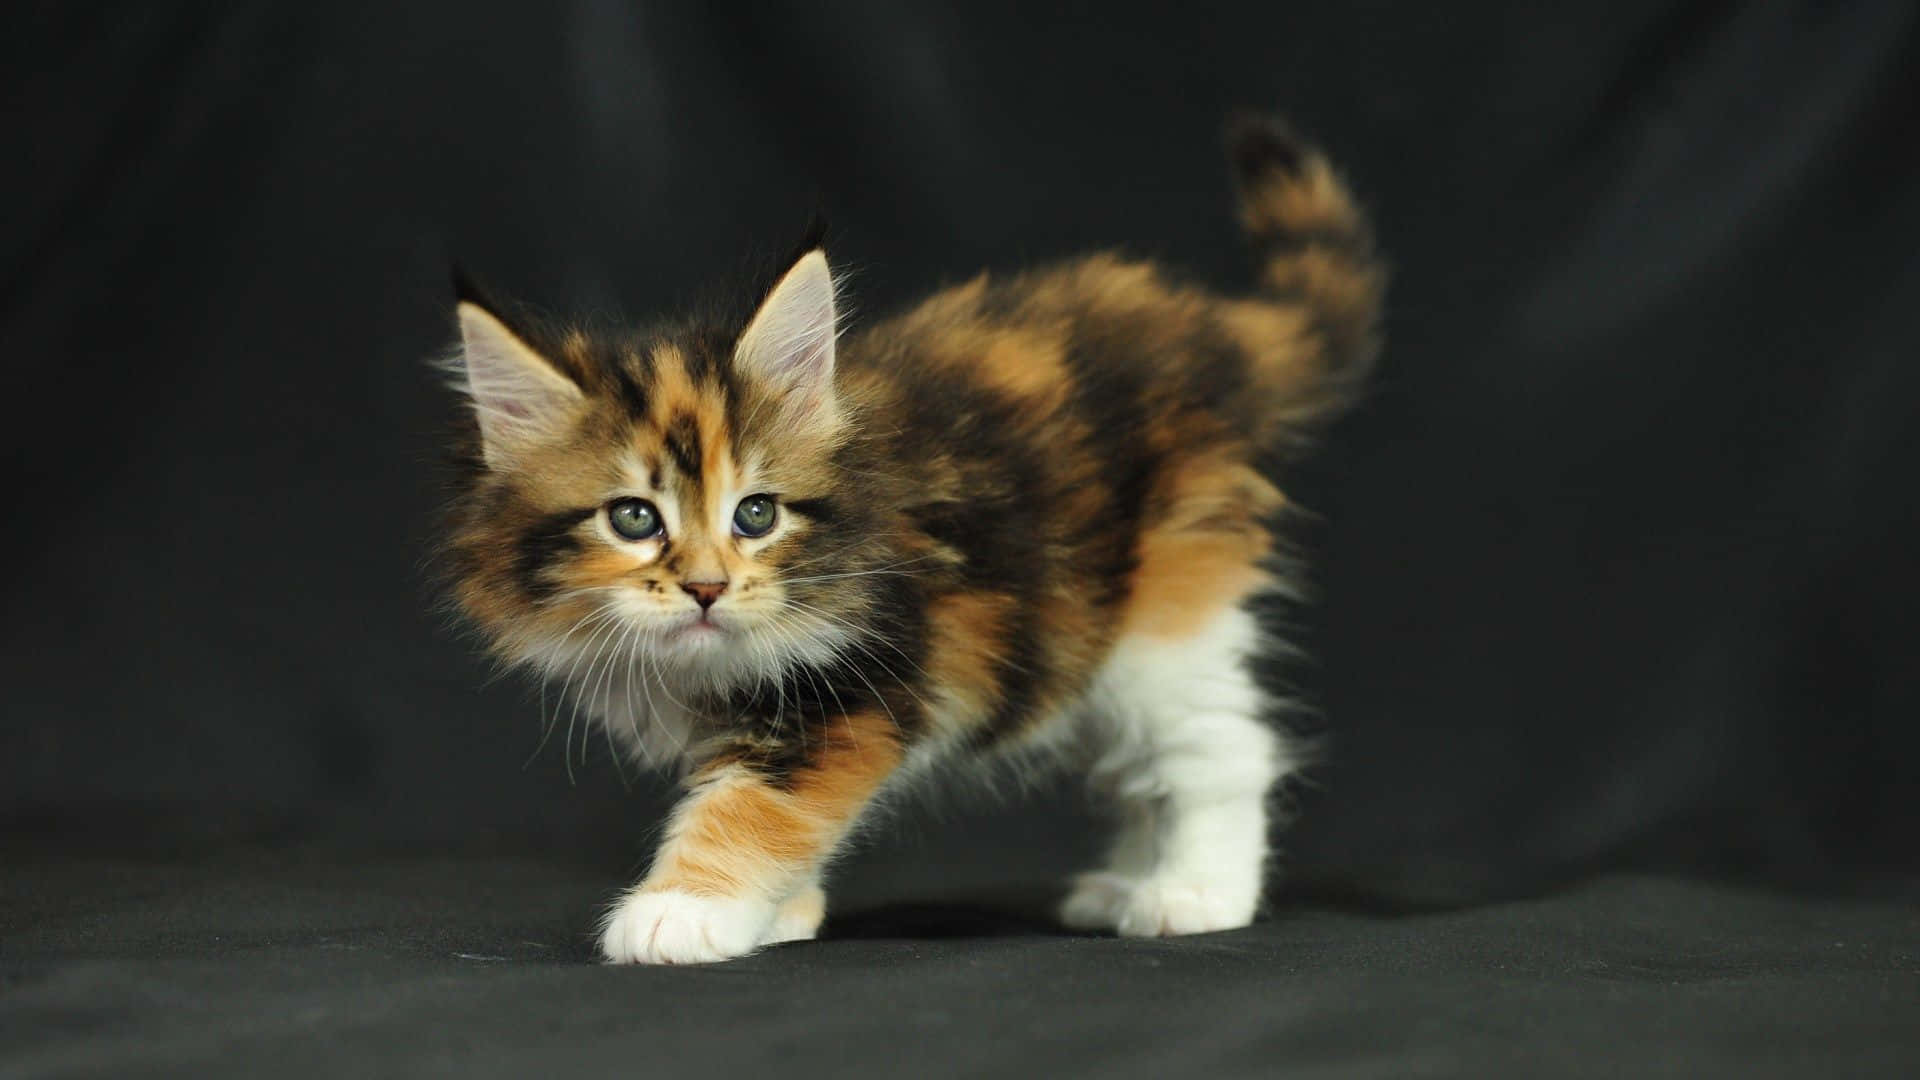 A Beautiful Maine Coon Cat